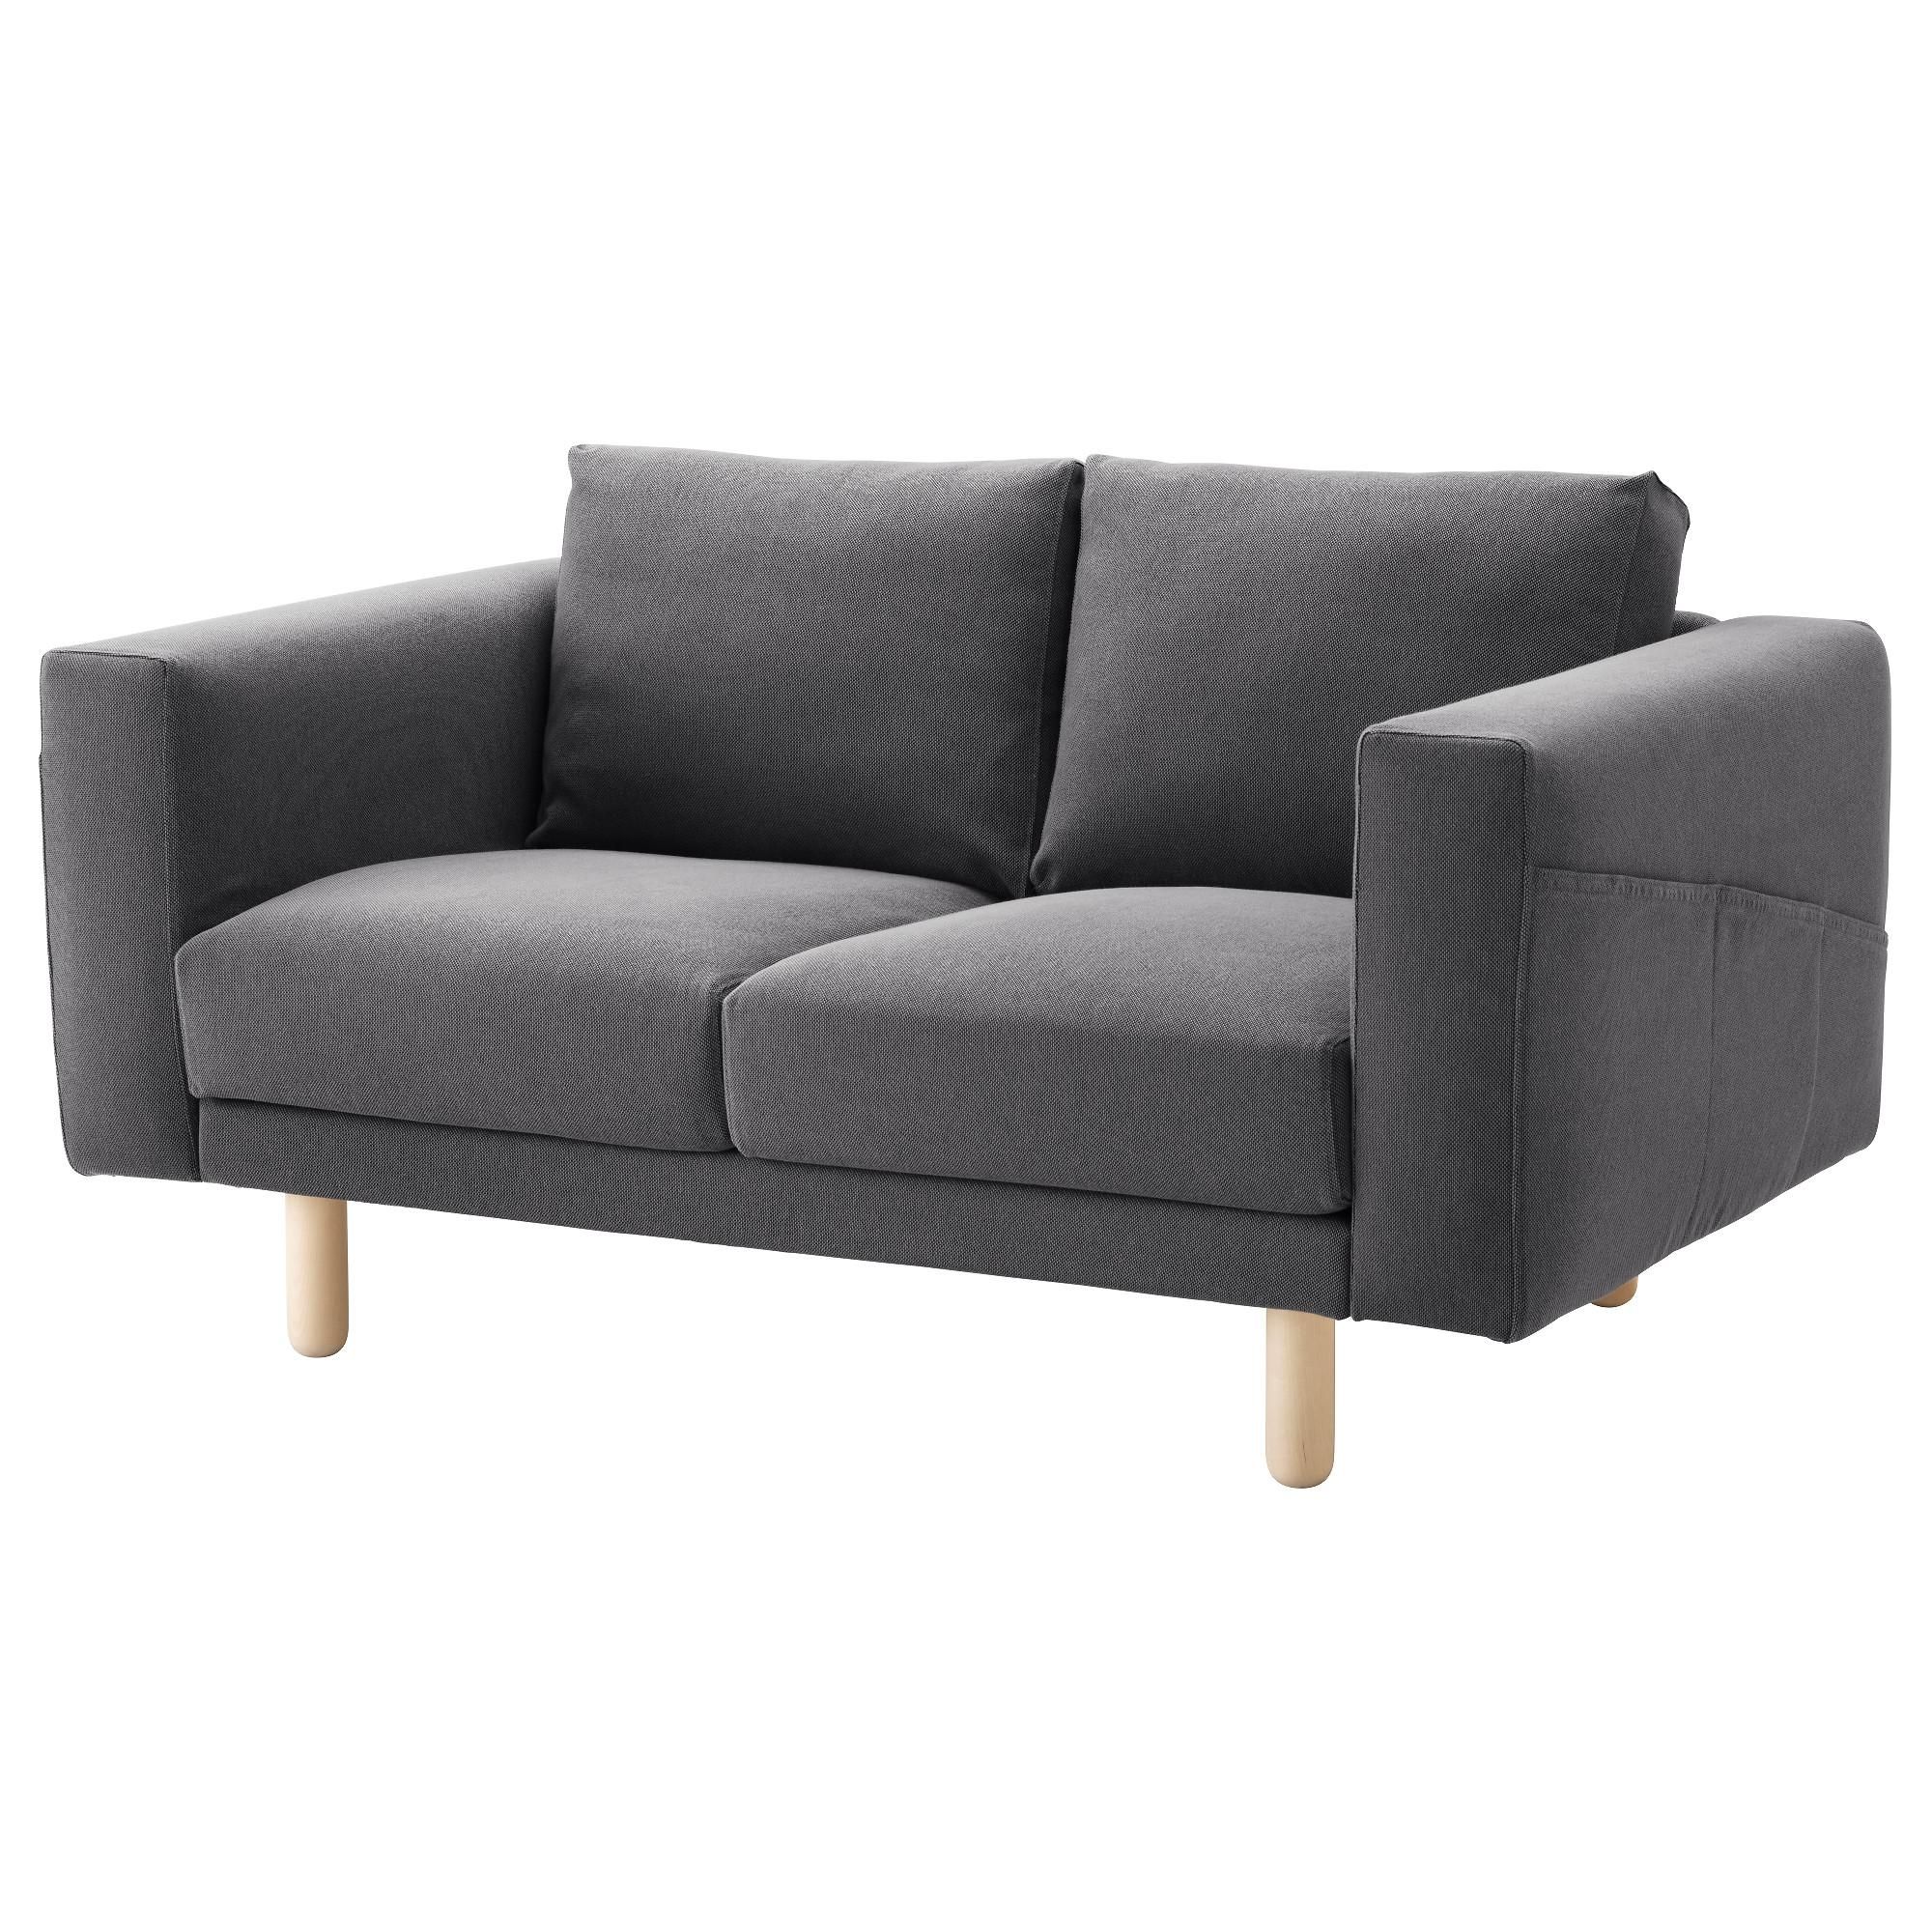 Sofas : Magnificent 2 Seater Chaise Sofa 2 Seater Corner Sofa Bed Inside 2x2 Corner Sofas (Photo 18 of 21)